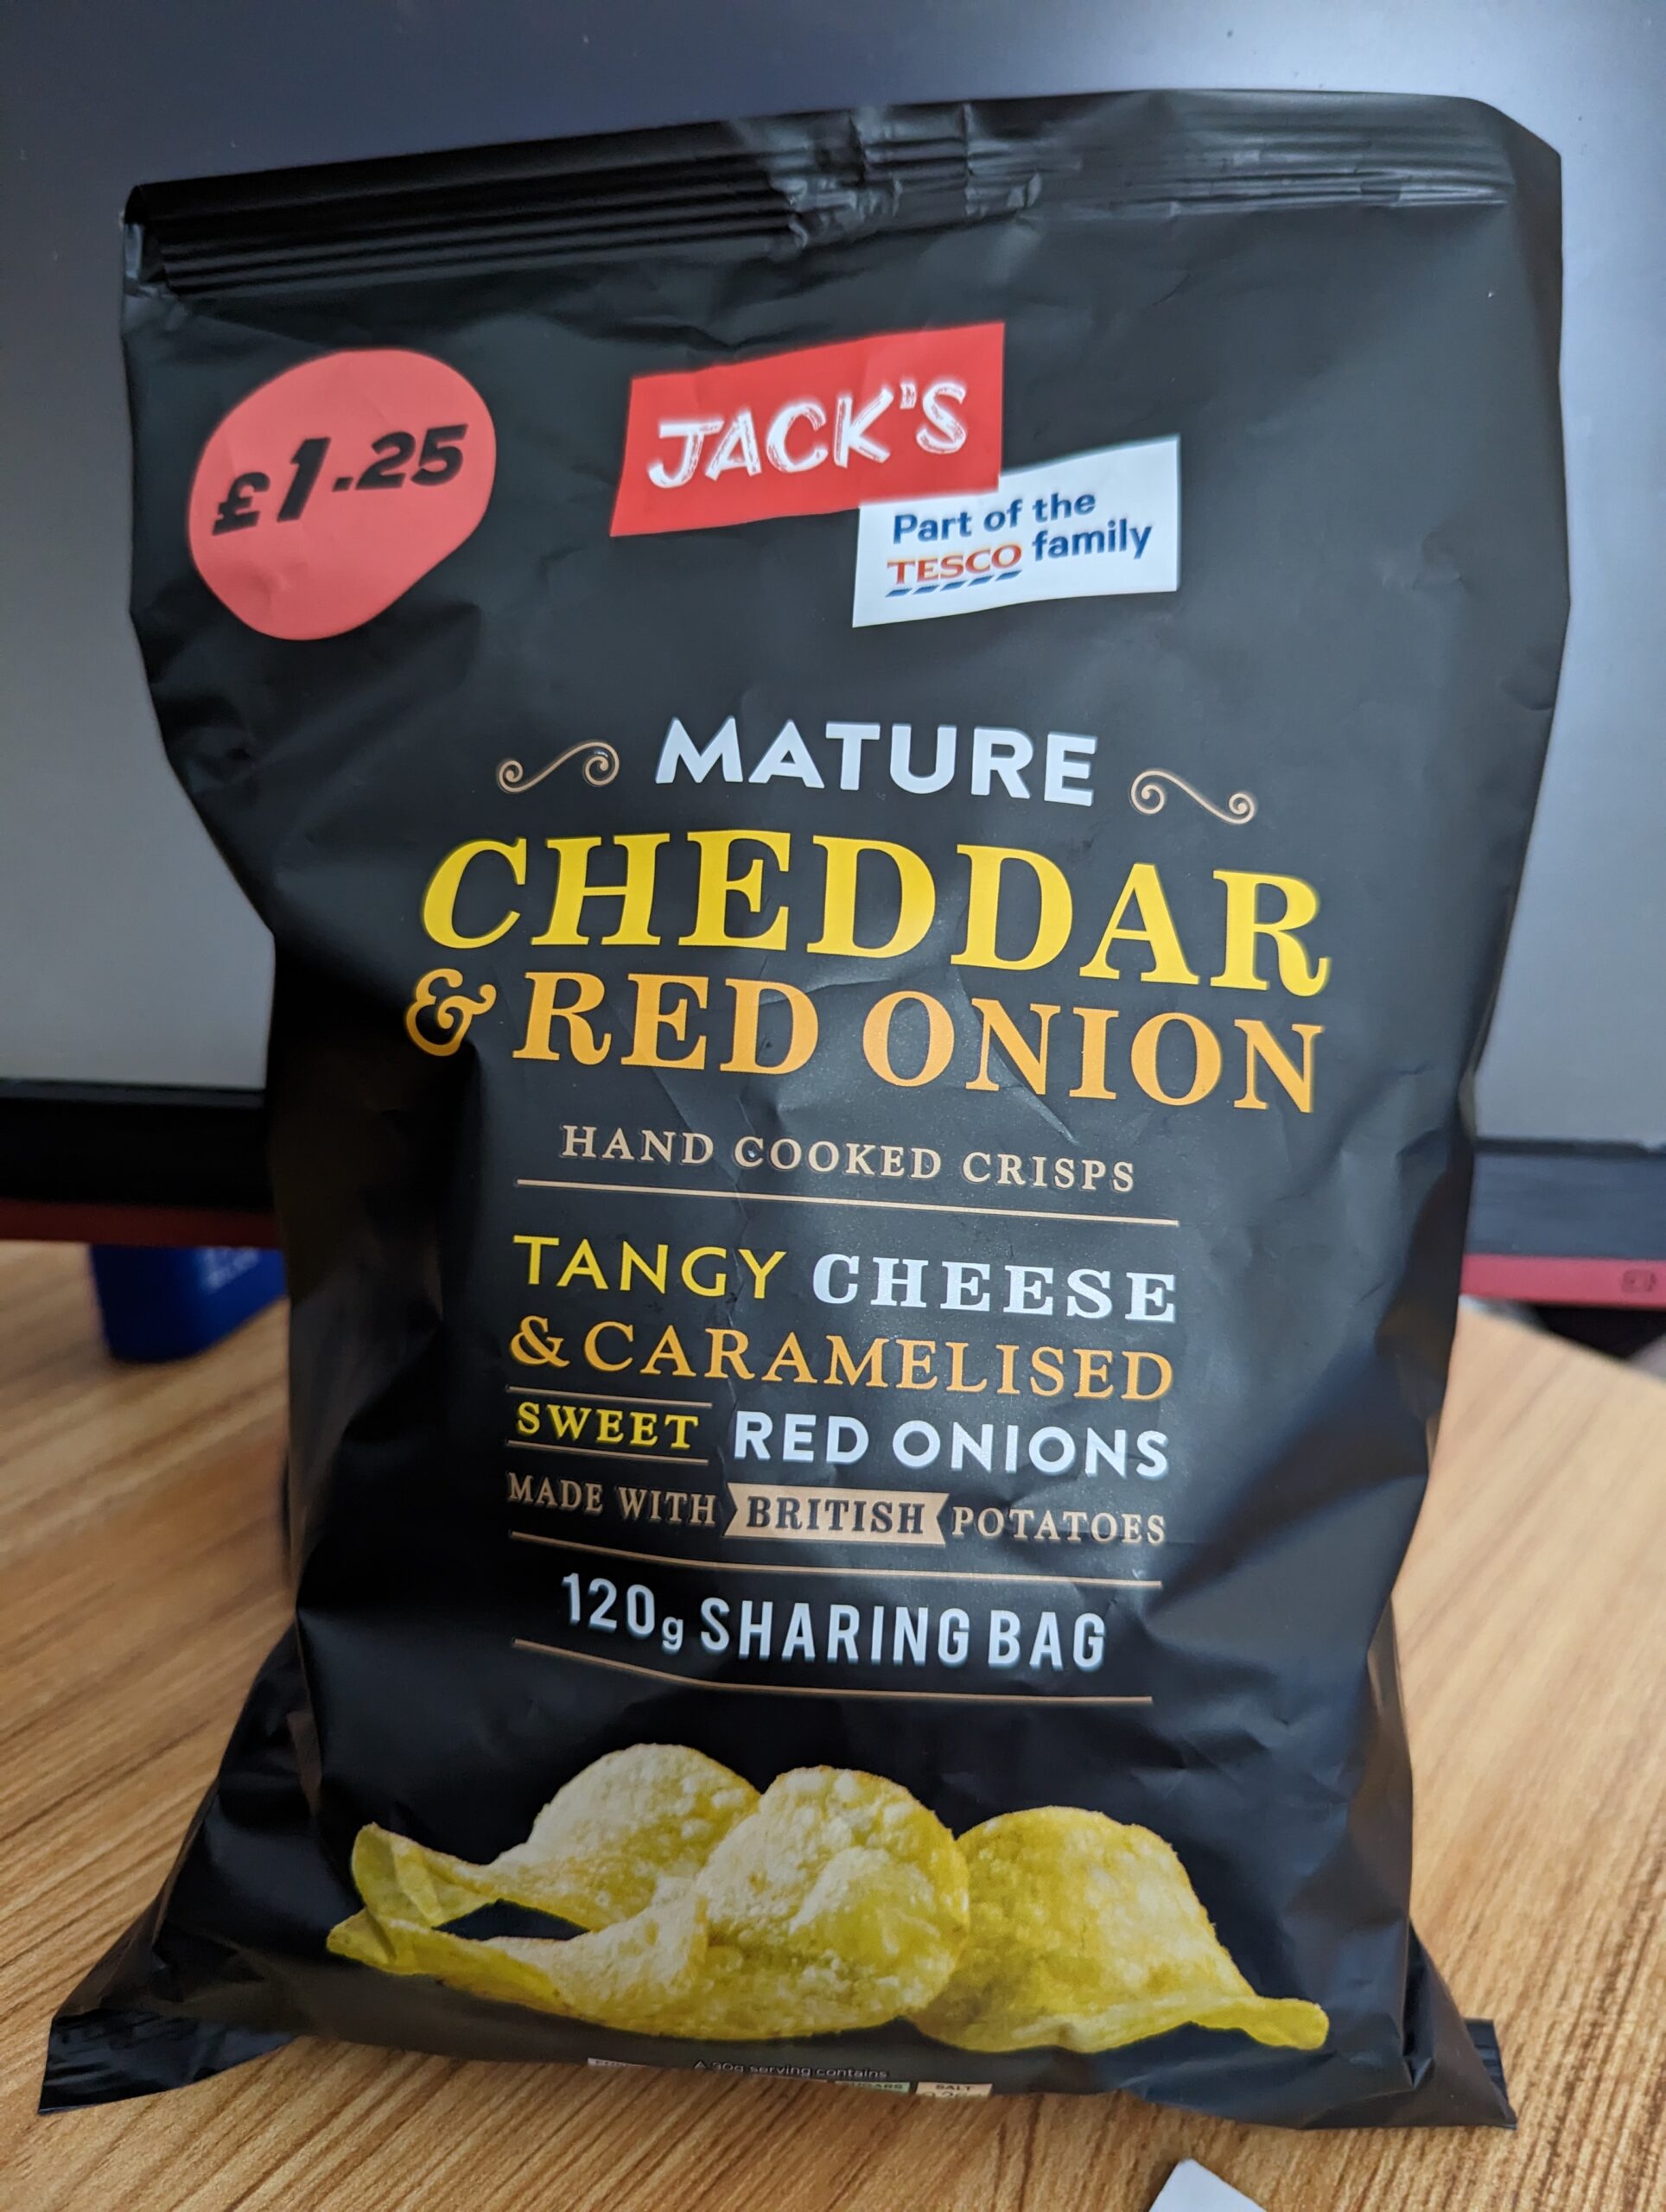 Jack's Cheddar & Red Onion Hand Cooked Crisps